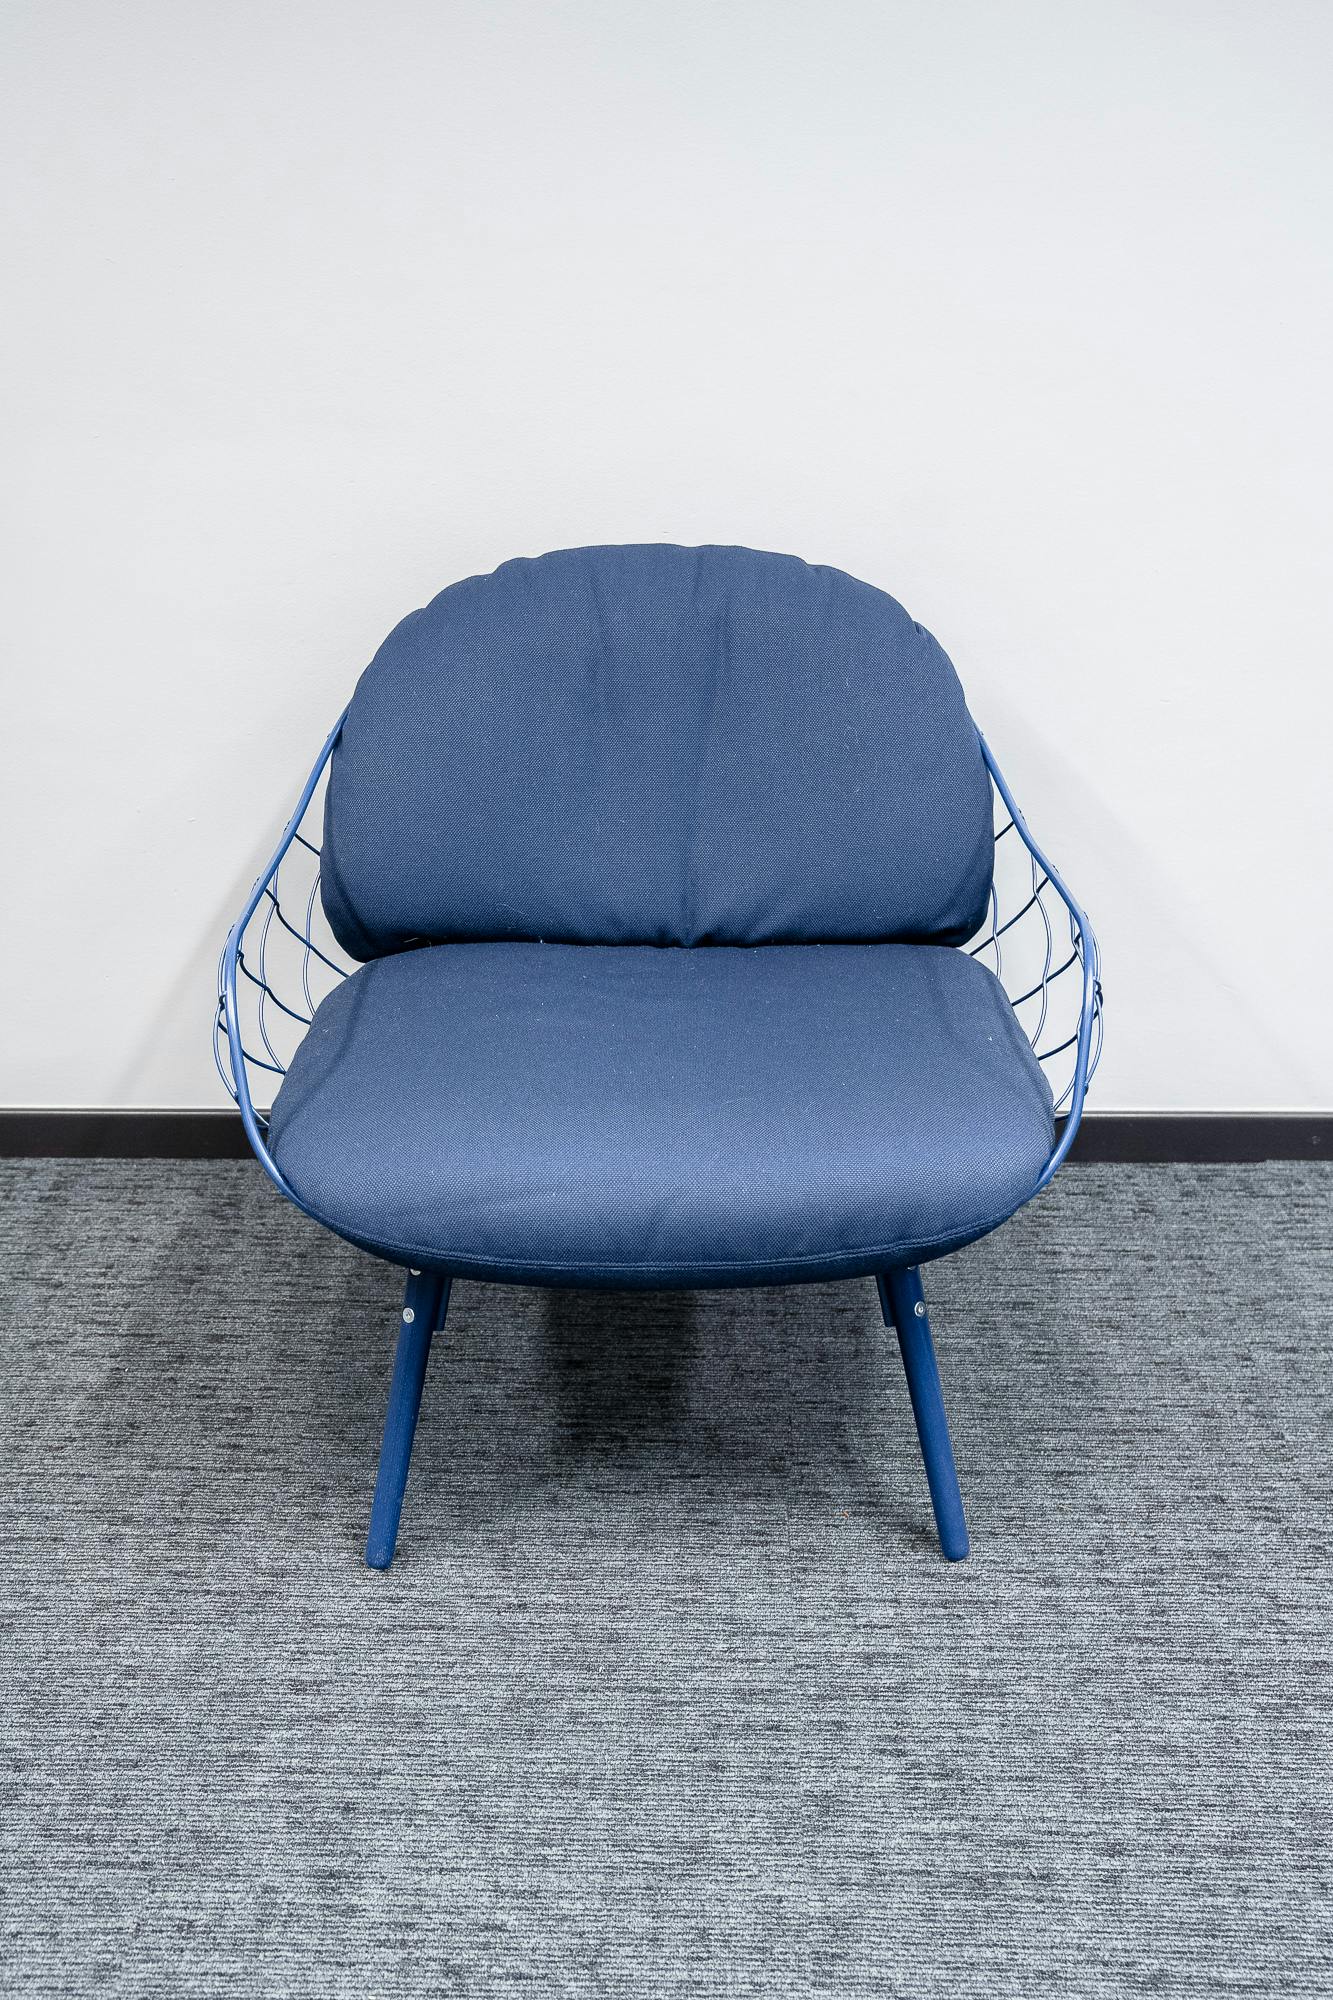 Lounge chair PINA design Bleu navy - Second hand quality "Armchairs and Couches" - Relieve Furniture